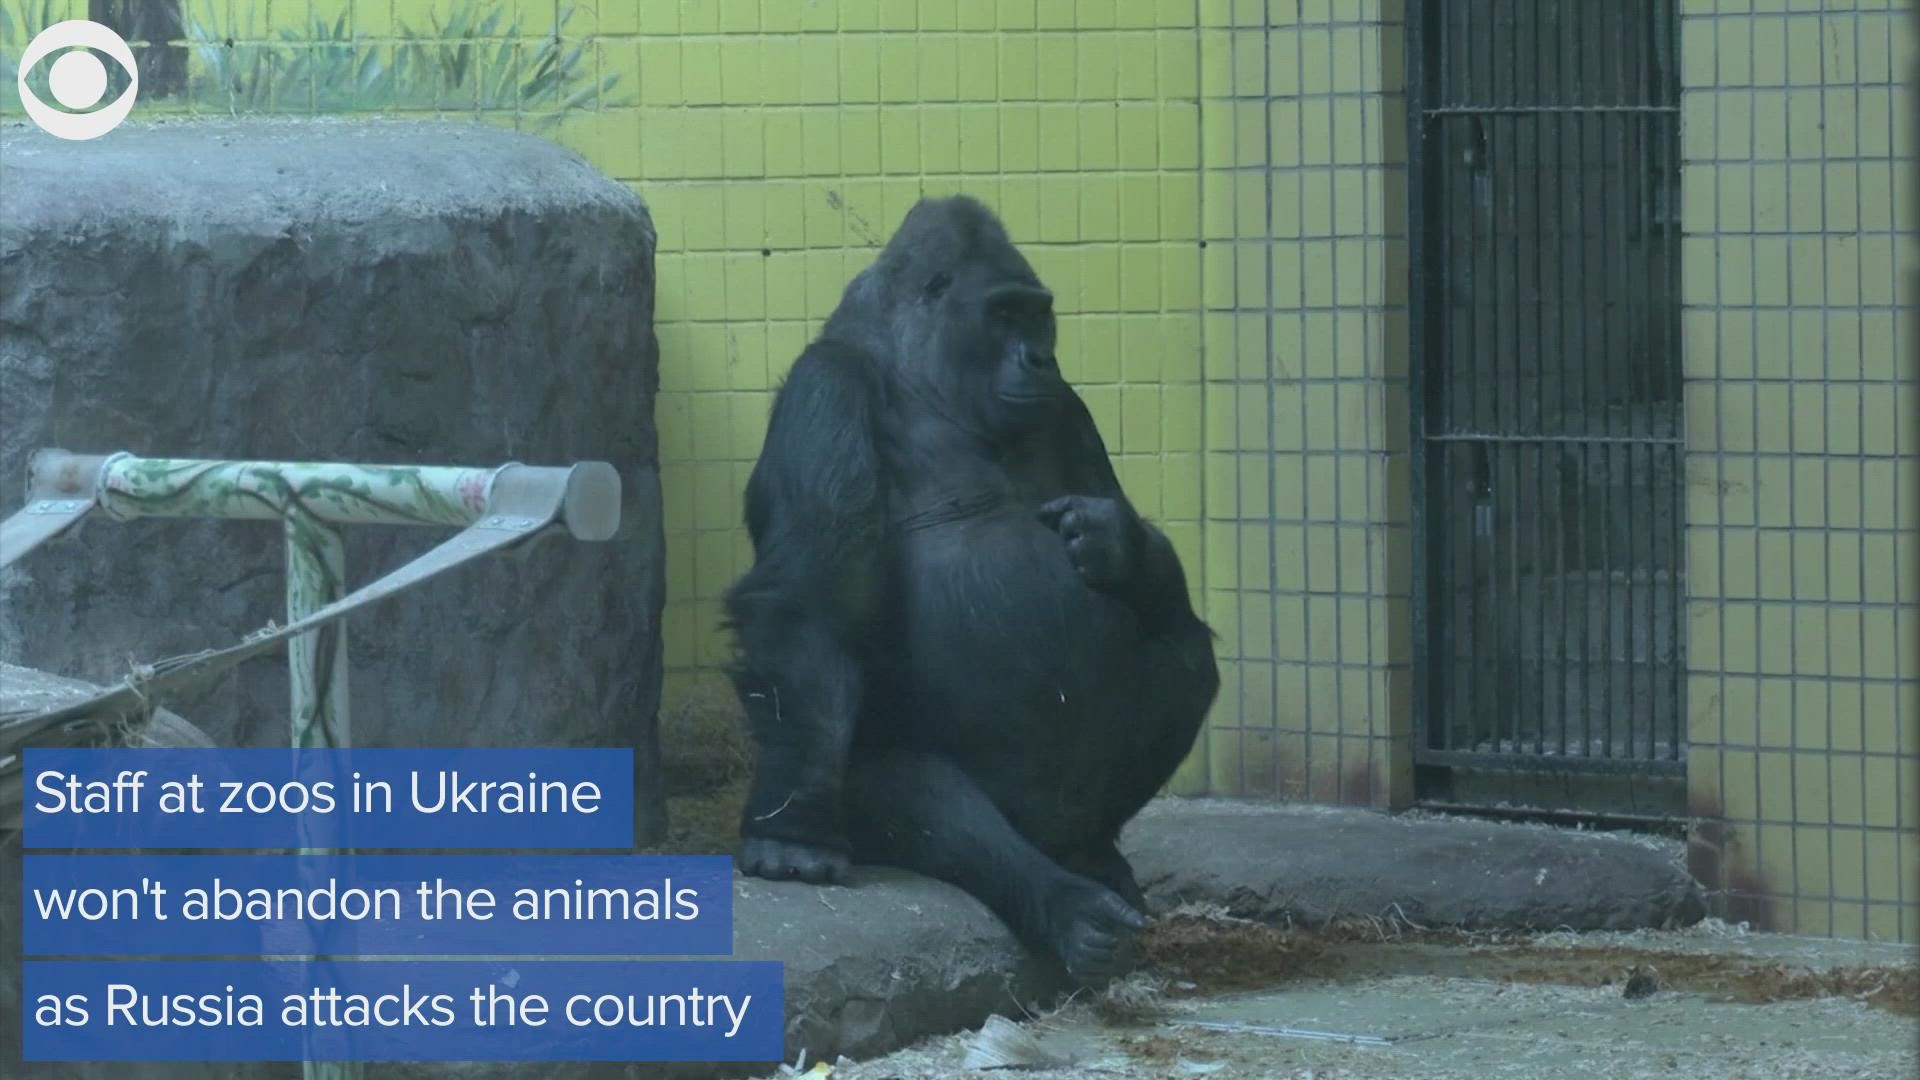 Ukrainian zoo staff stayed behind to care for animals amid Russia's invasion.